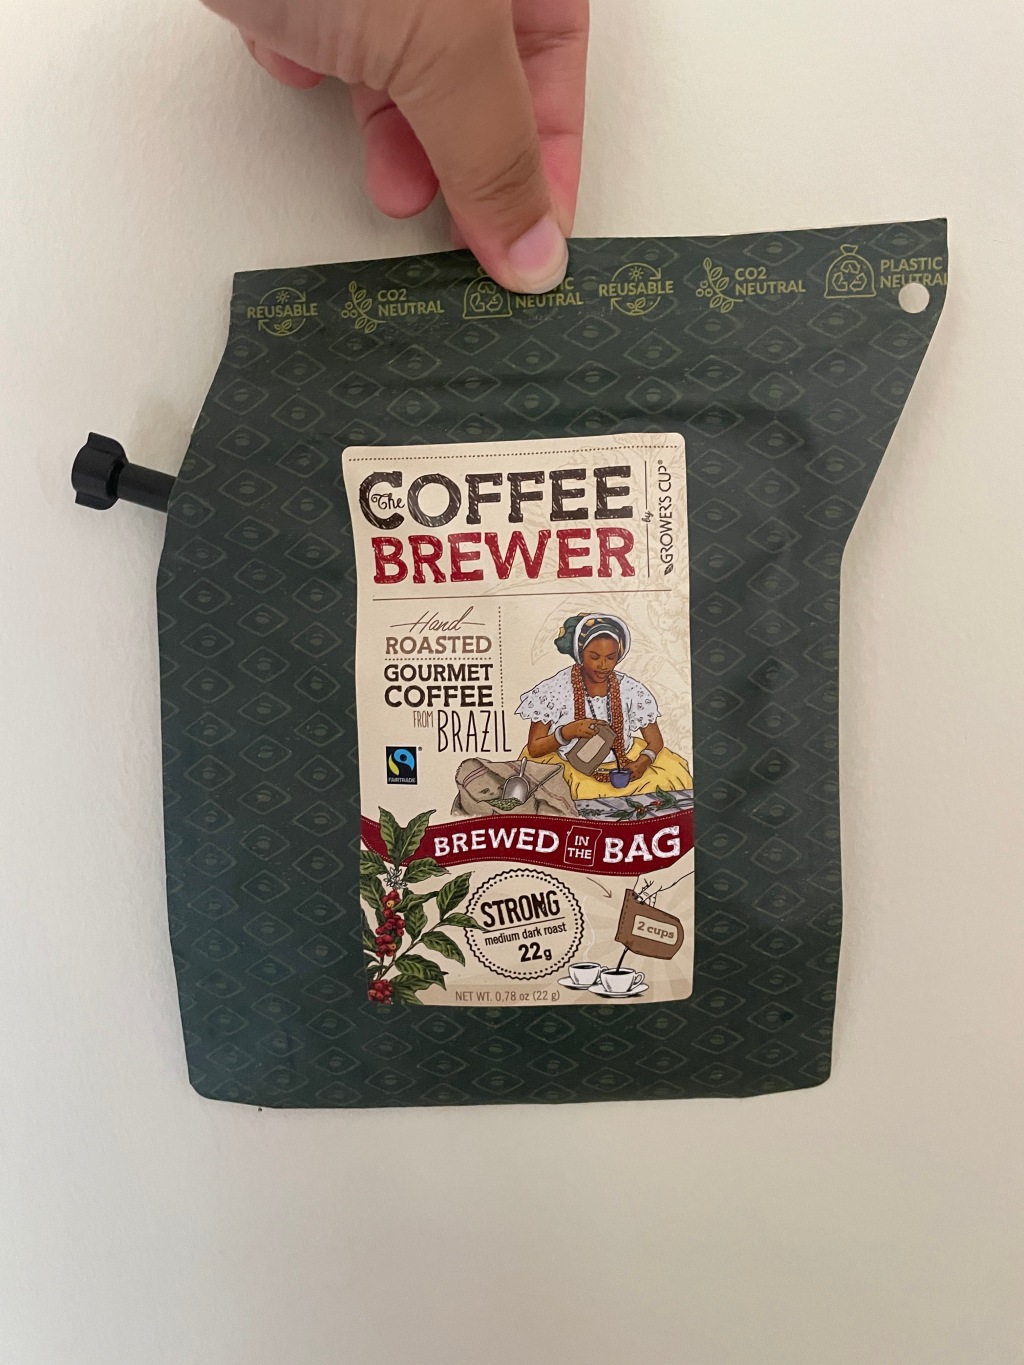 Coffee packaging – it just gets better.